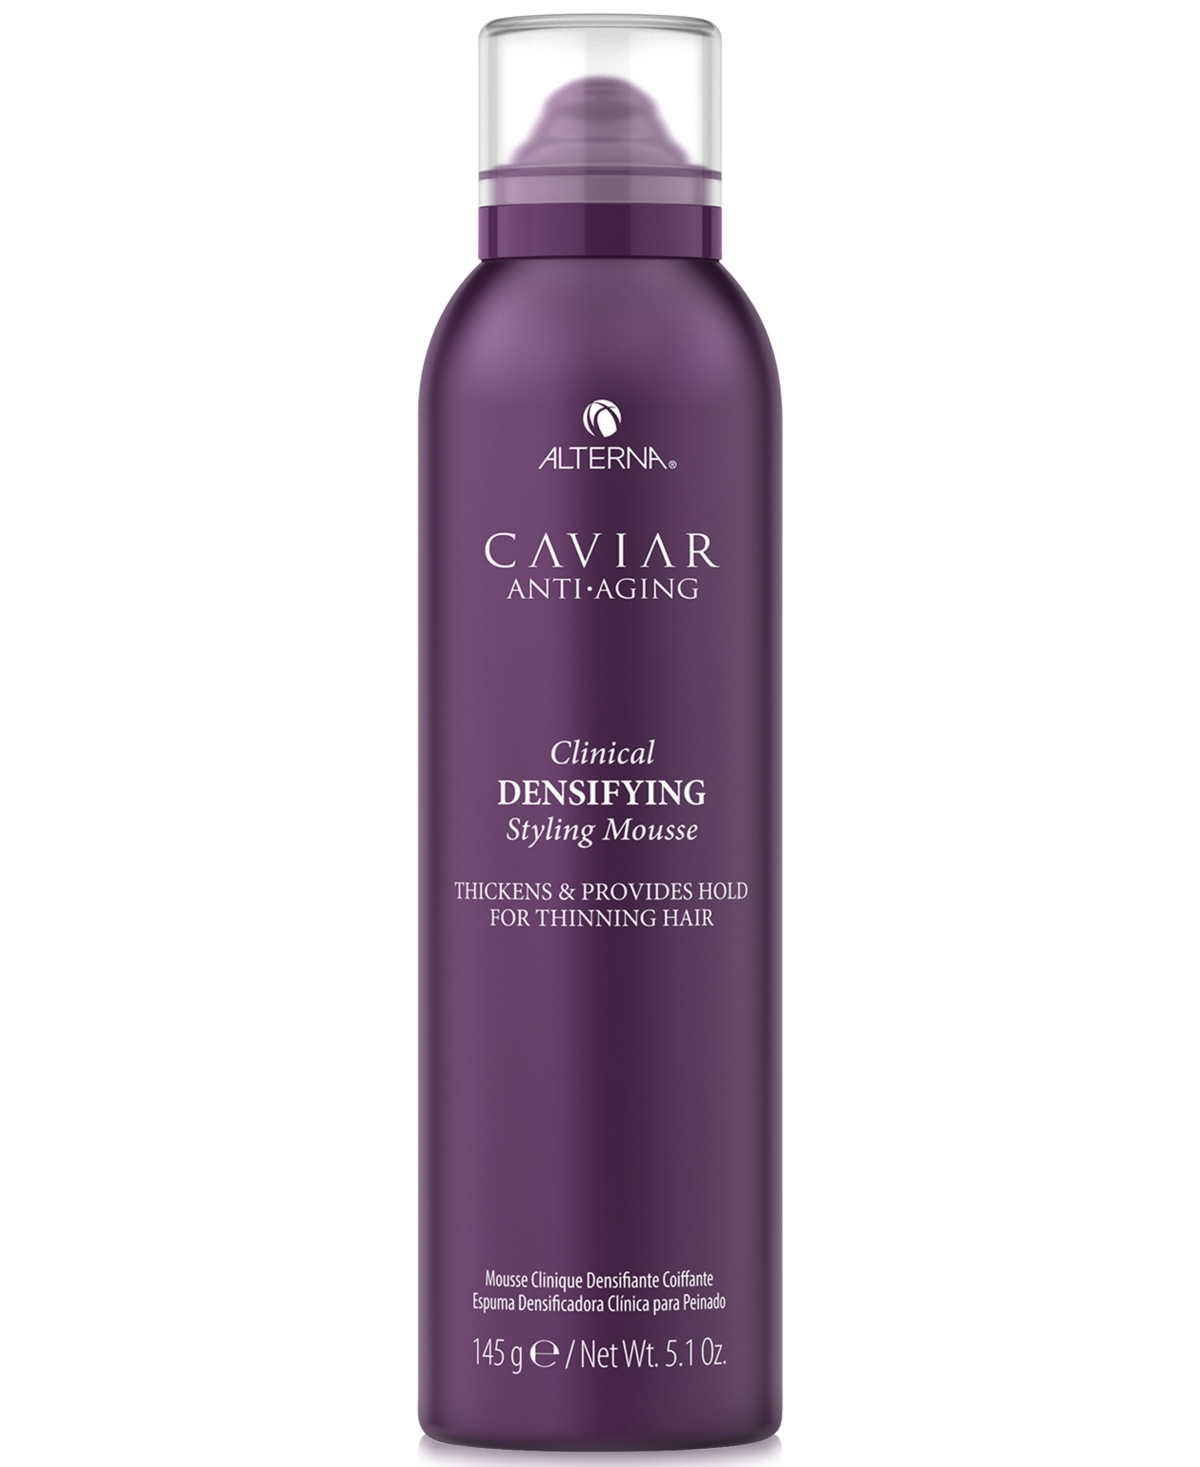 Caviar Anti-Aging Clinical Densifying Styling Mousse, 5.1-oz.